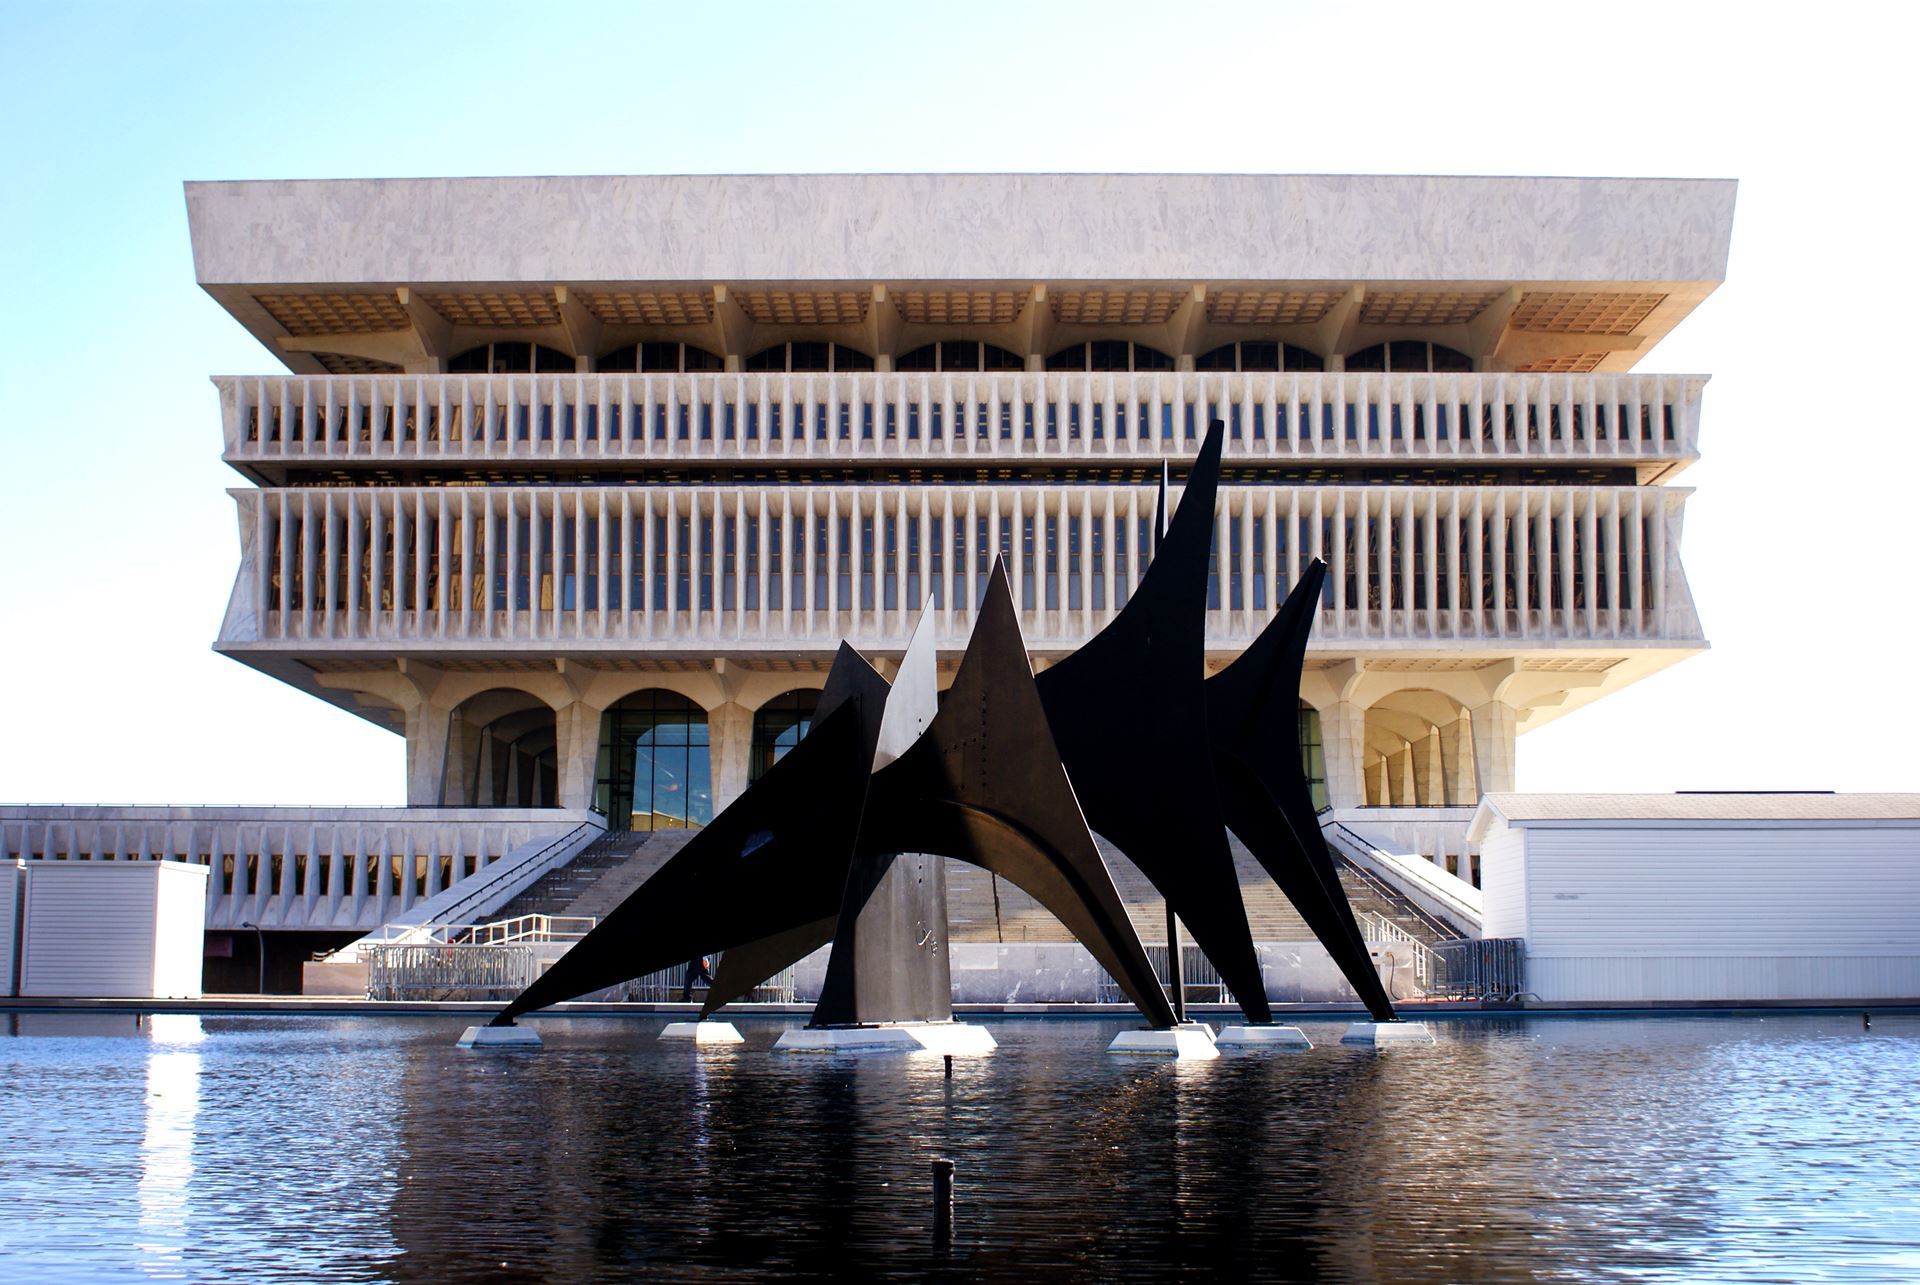 NYS Museum, a brutalist style architecture situated behind water with a large metal abstract sculpture